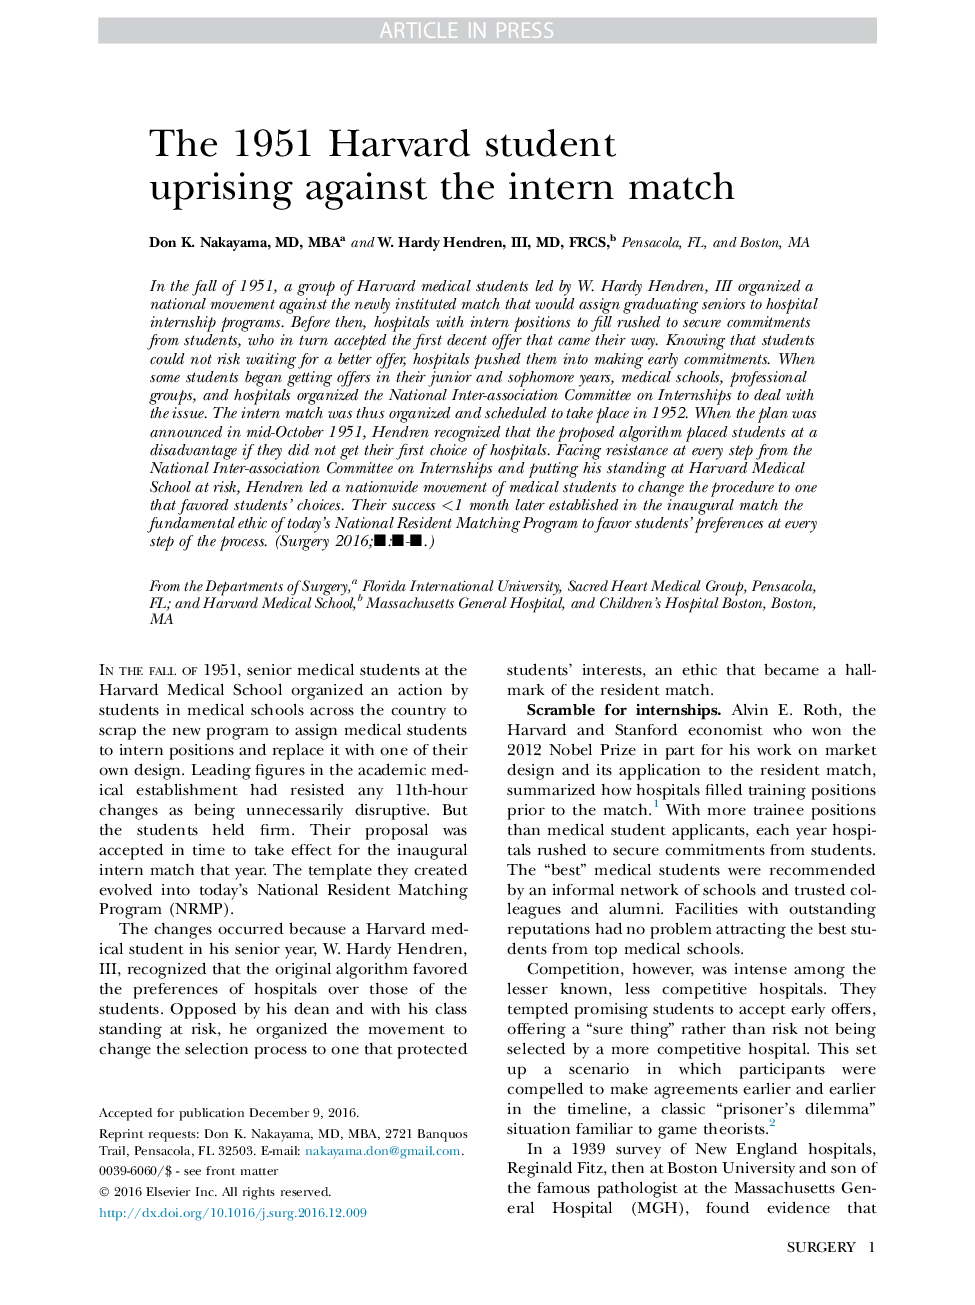 The 1951 Harvard student uprising against the intern match